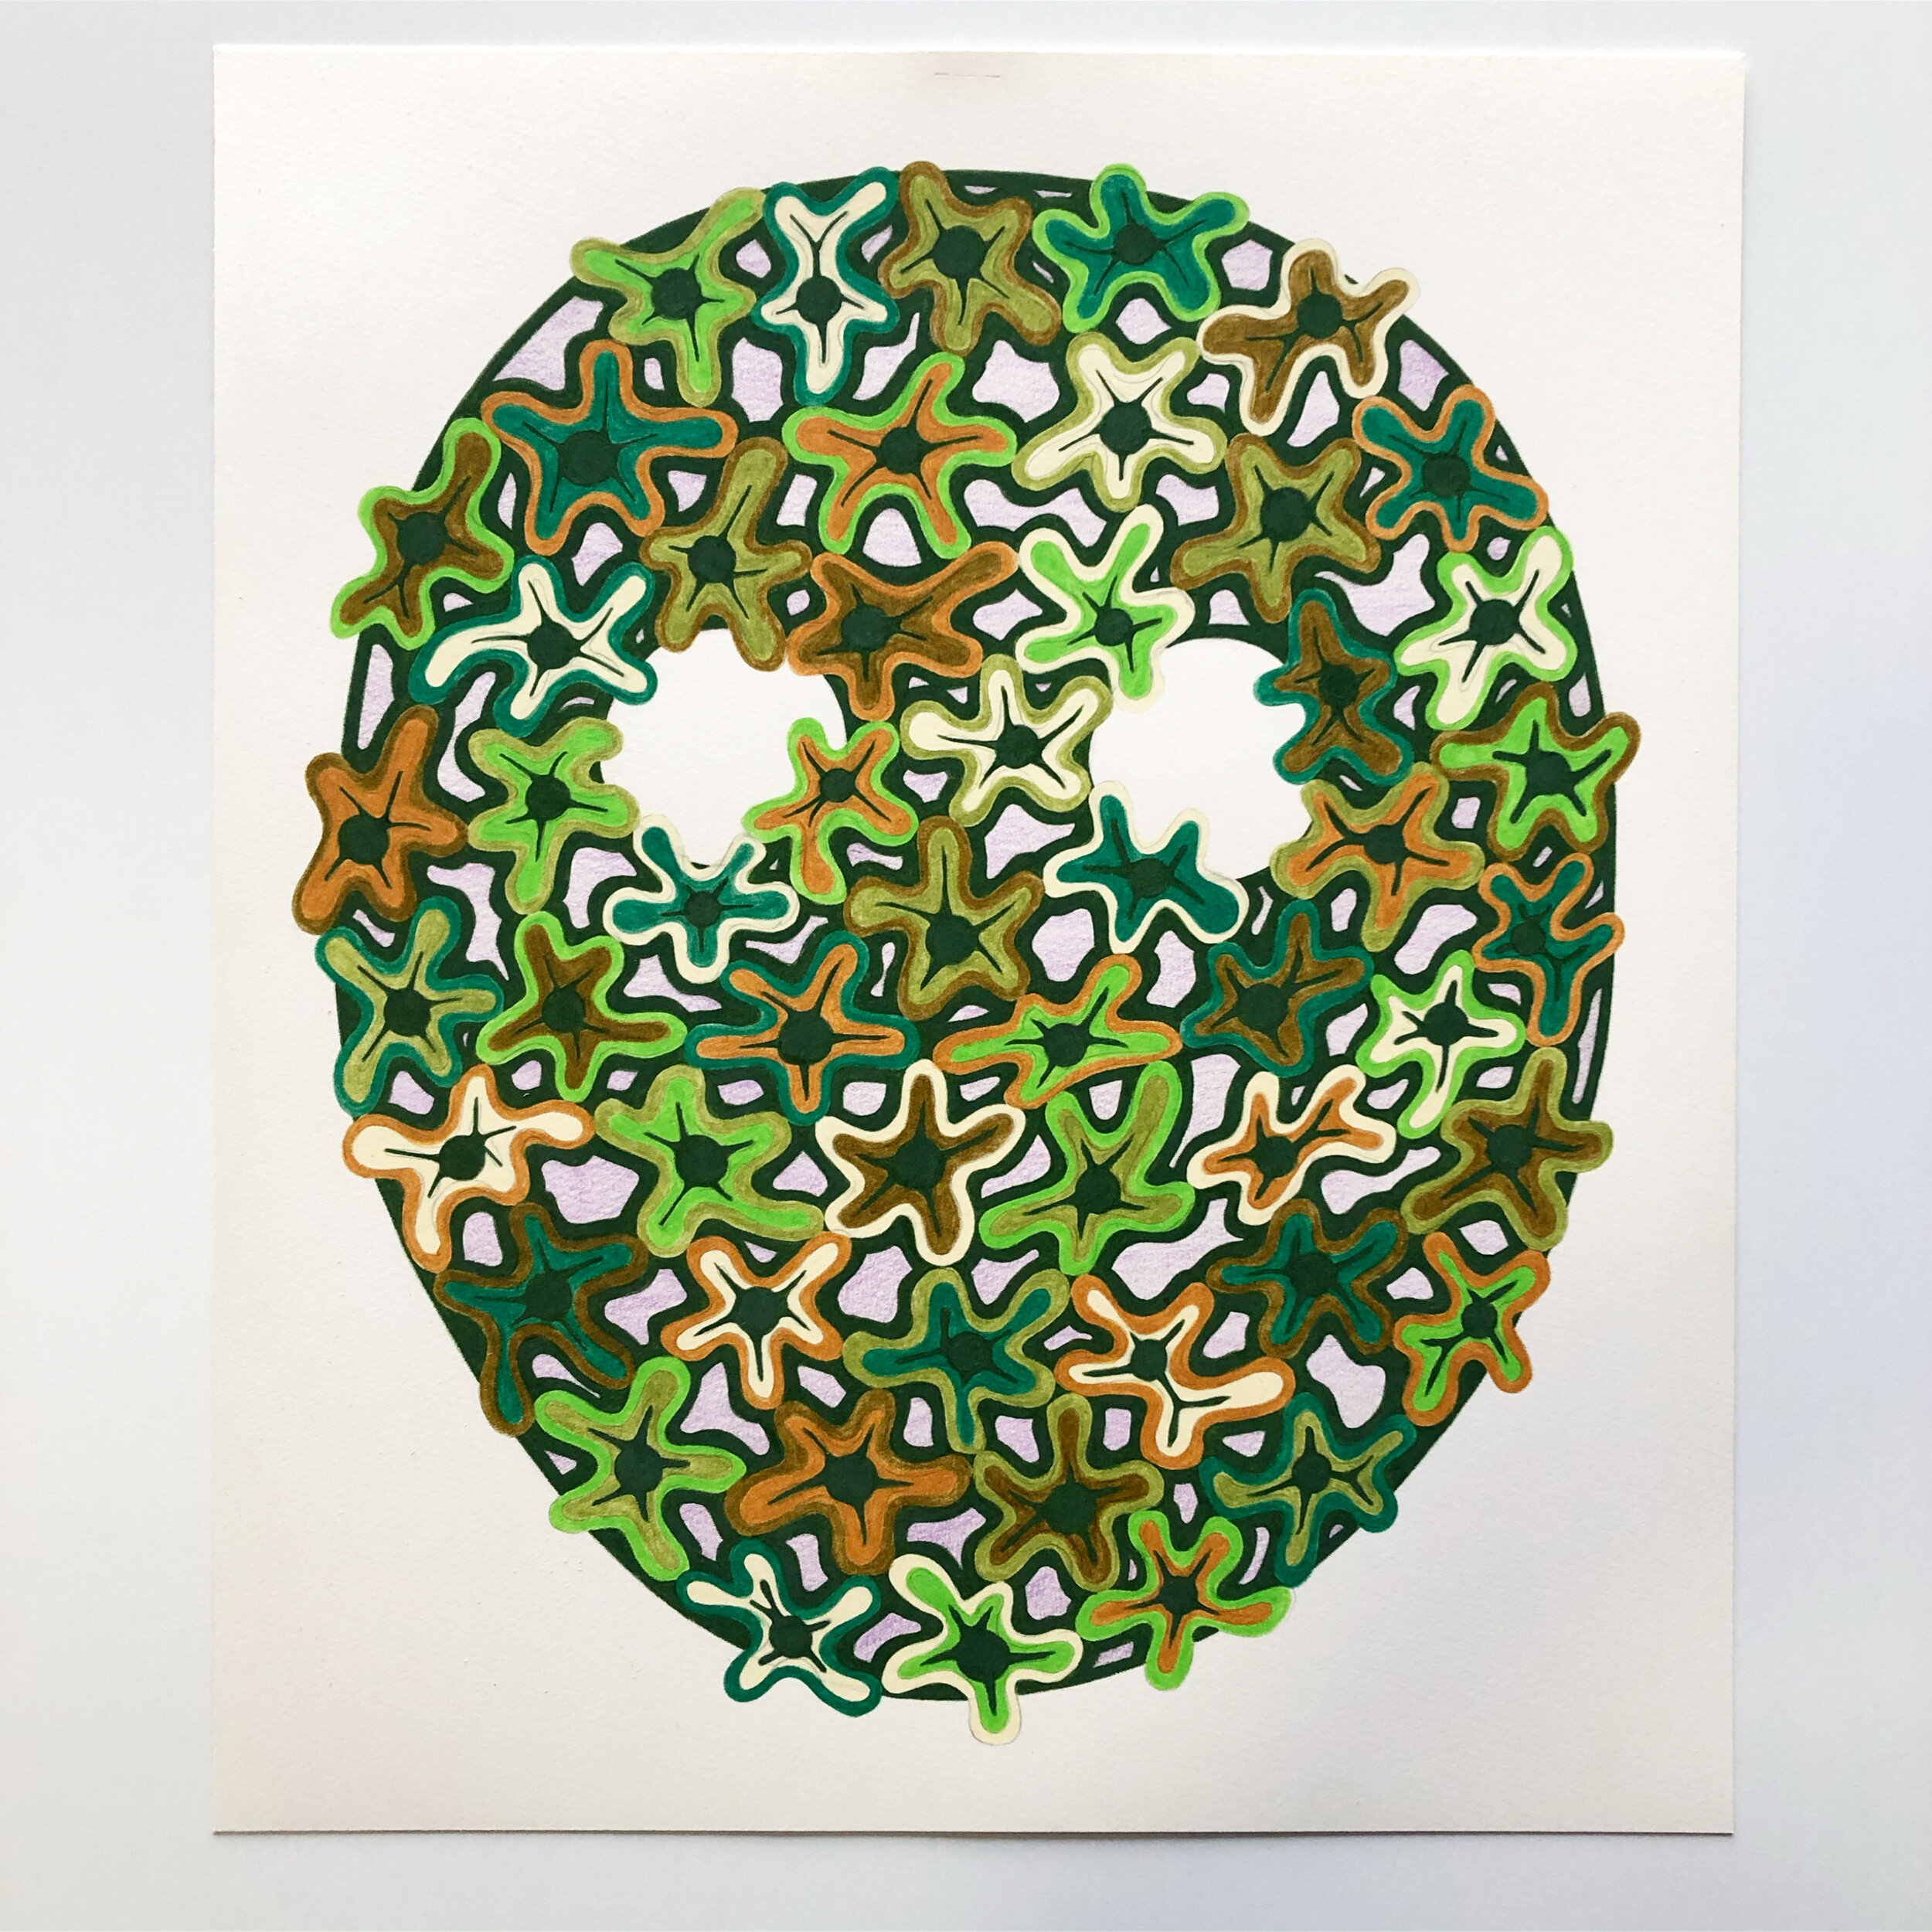 Mask, 2020, colored pencil on paper, 16 1/2 x 14"